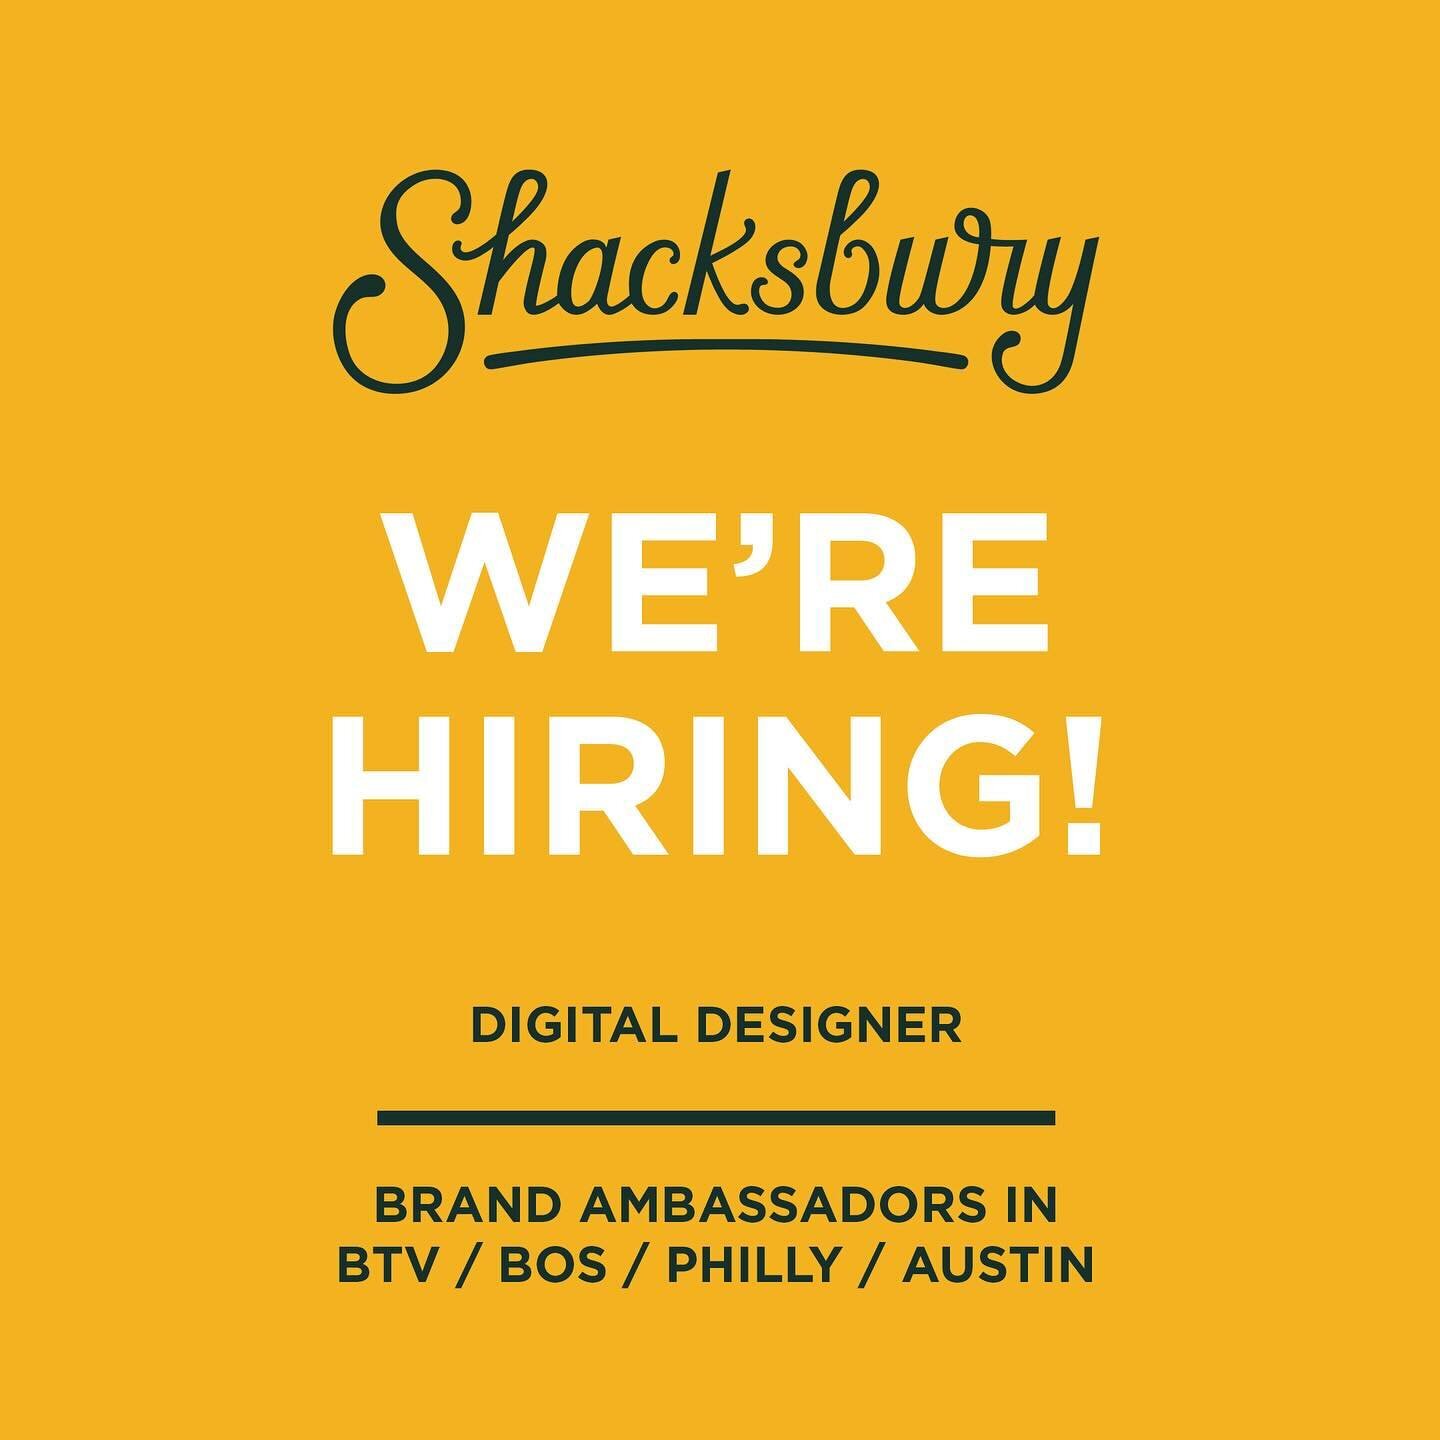 We&rsquo;re hiring! Check out the #linkinbio for details.